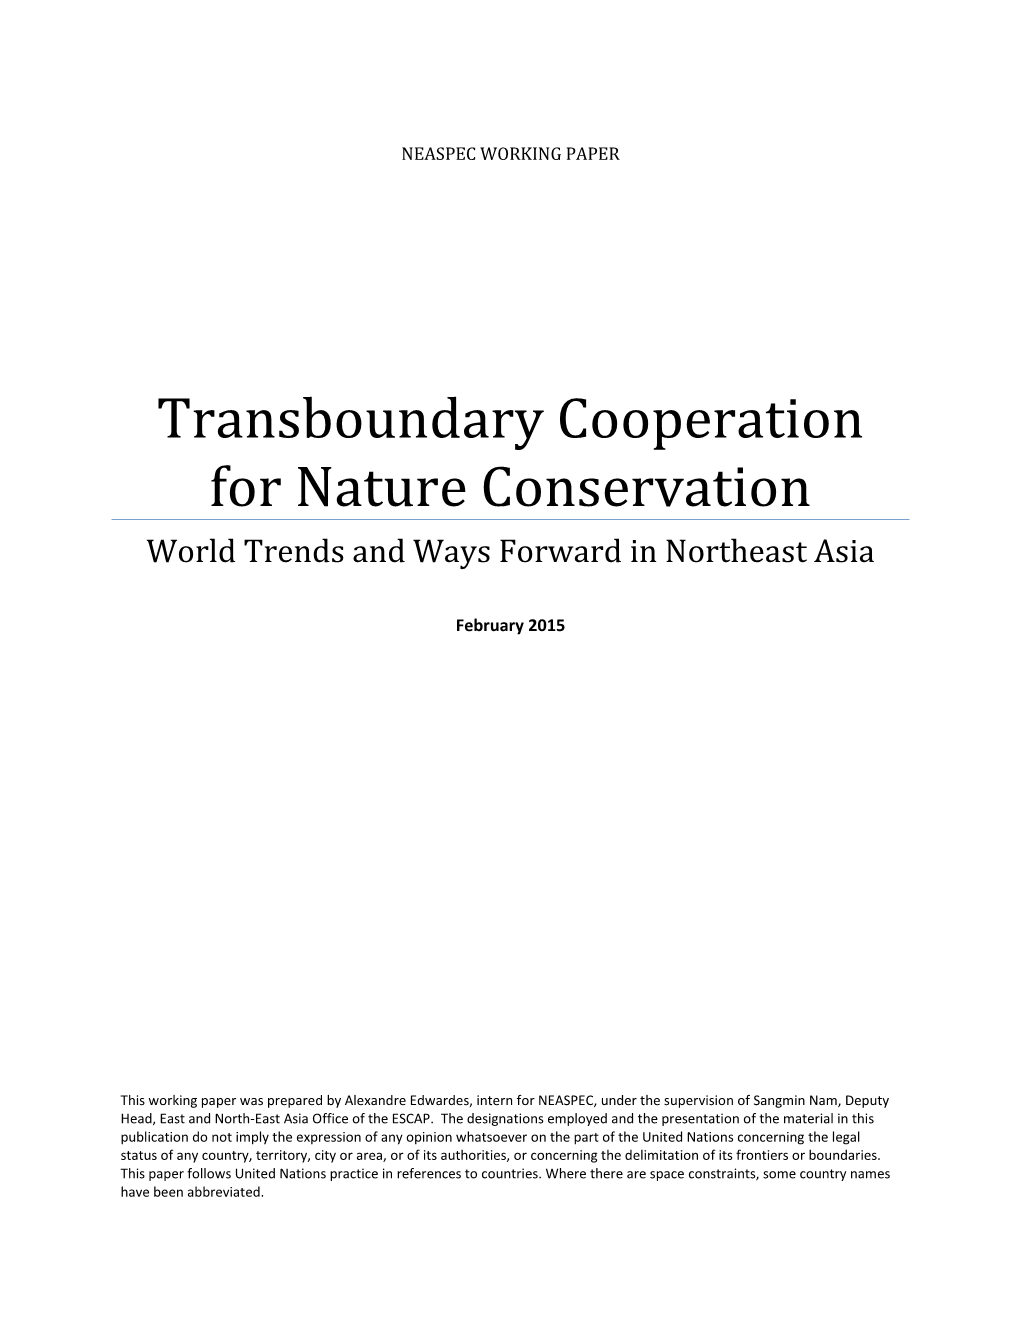 Transboundary Cooperation for Nature Conservation World Trends and Ways Forward in Northeast Asia